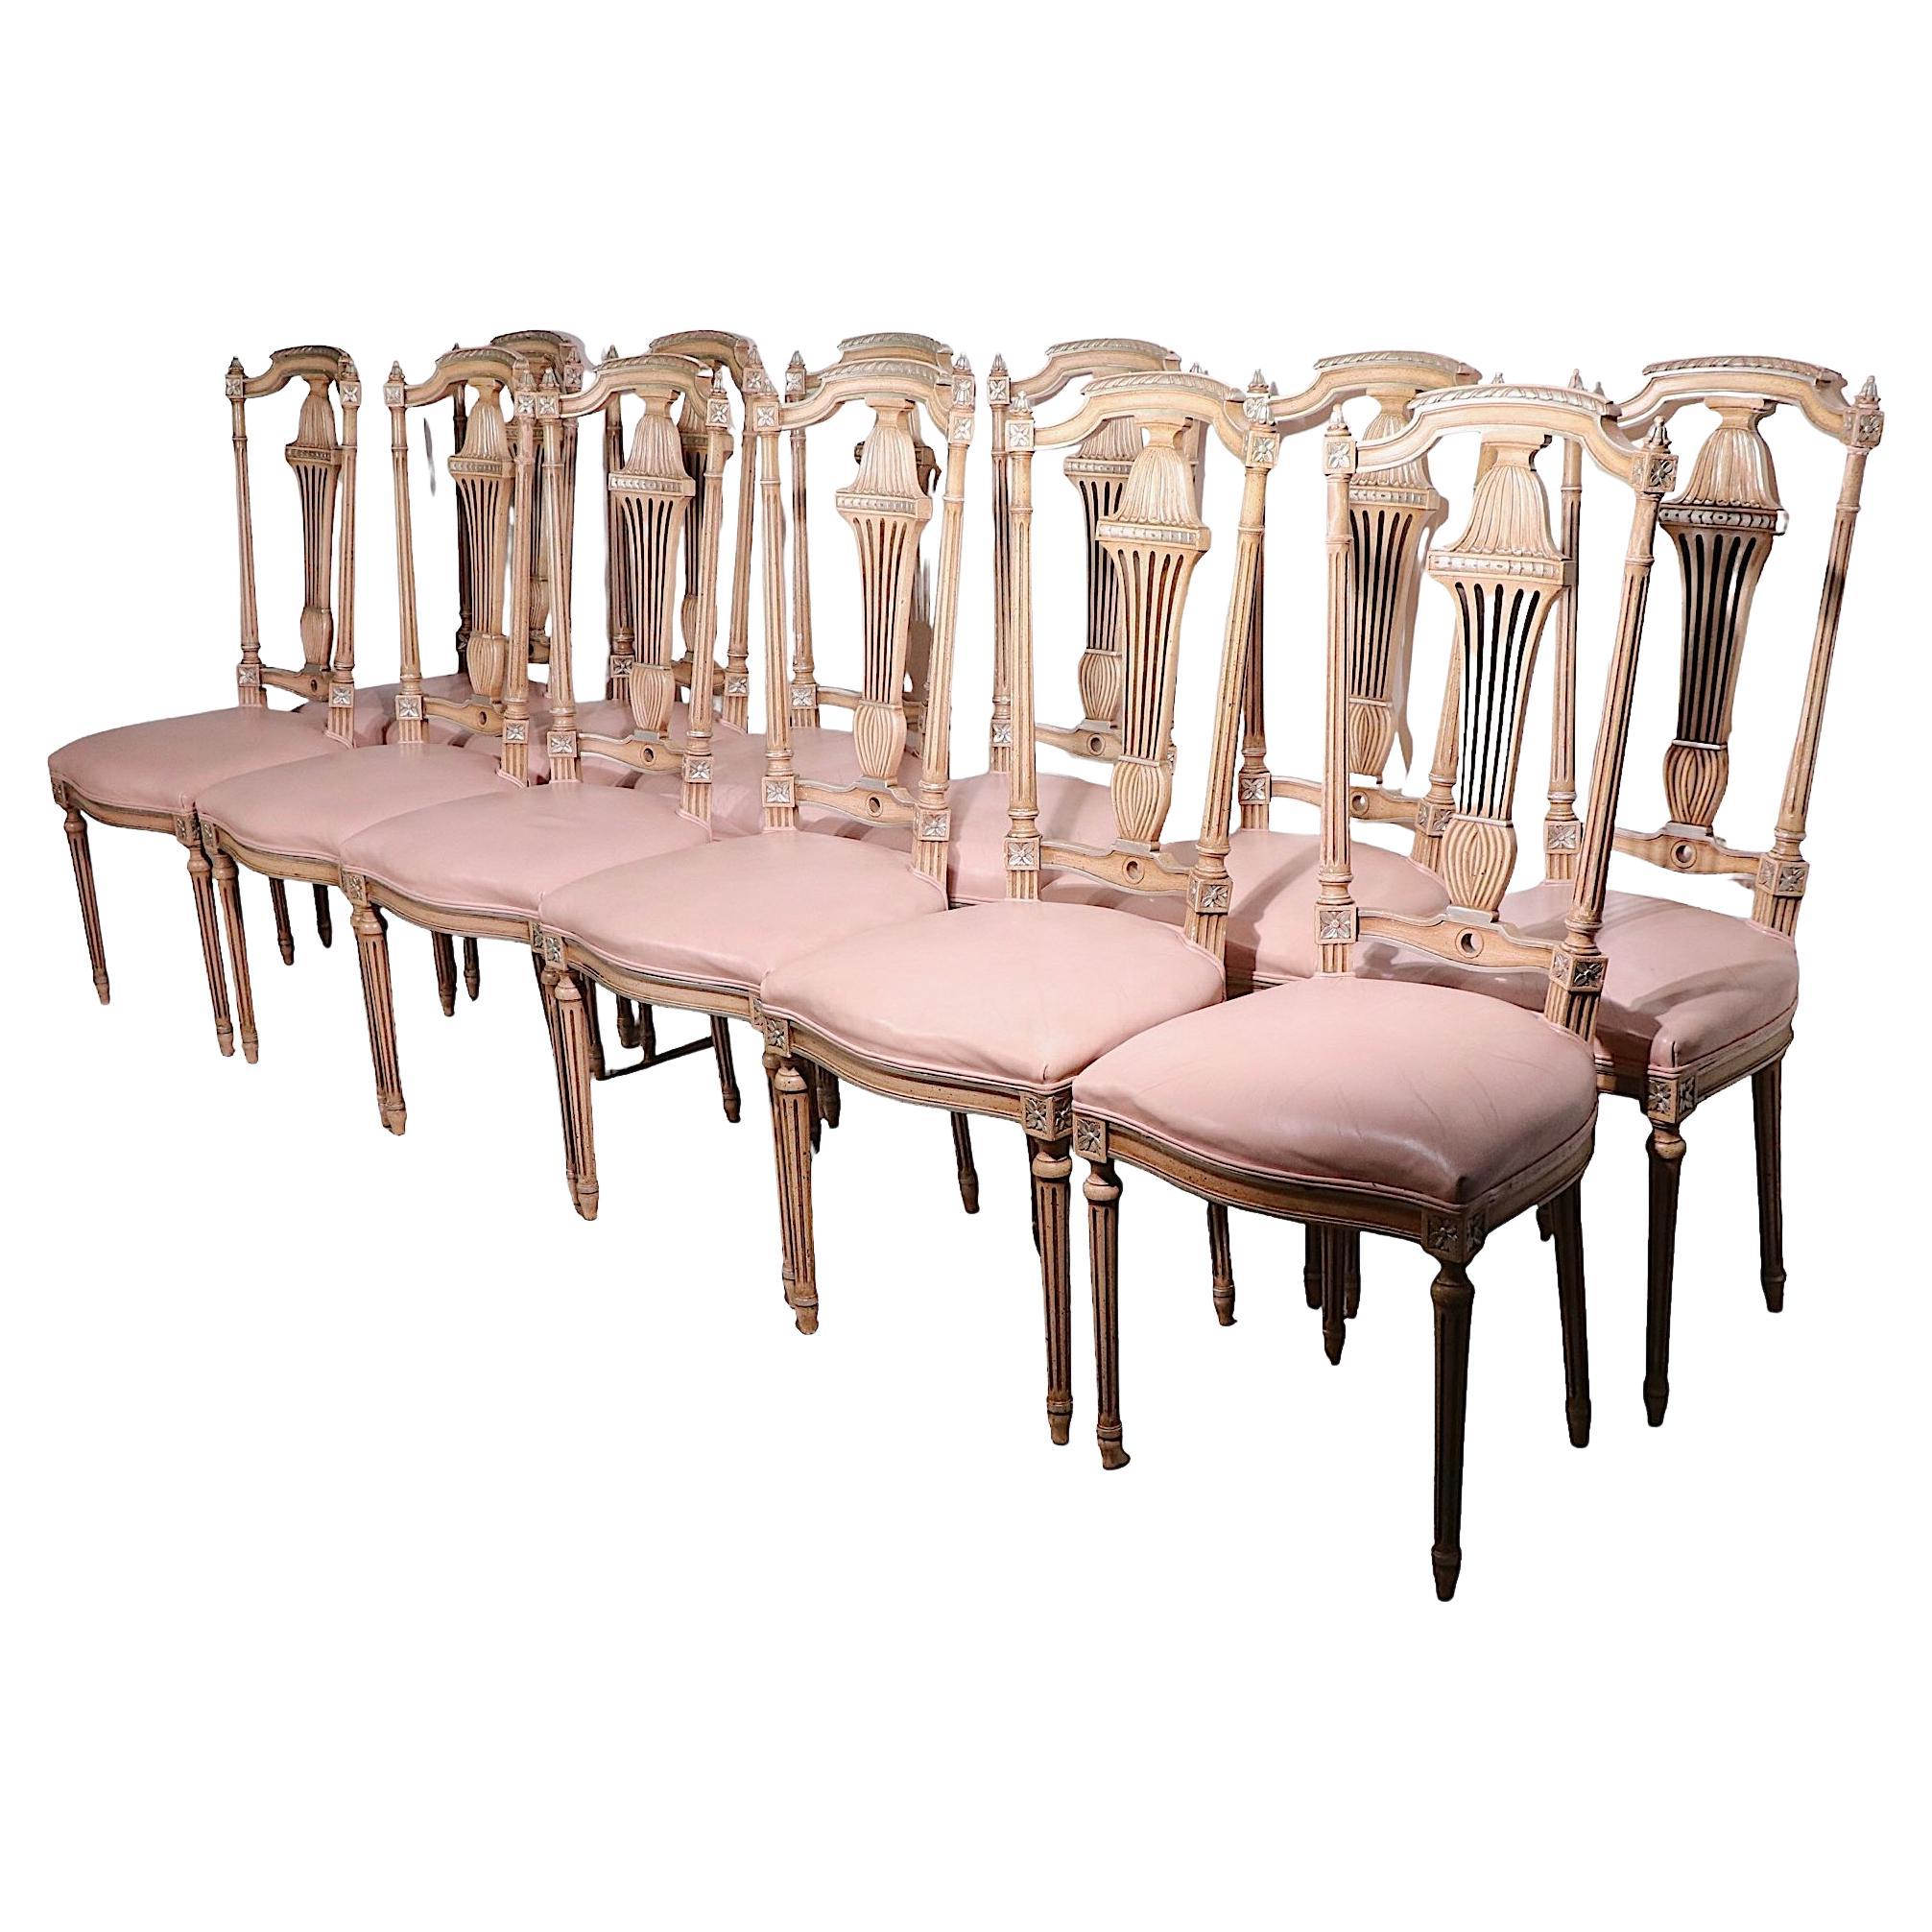 Decorative Set of 12 Italian Style Dining Chairs of Carved Wood and Leather